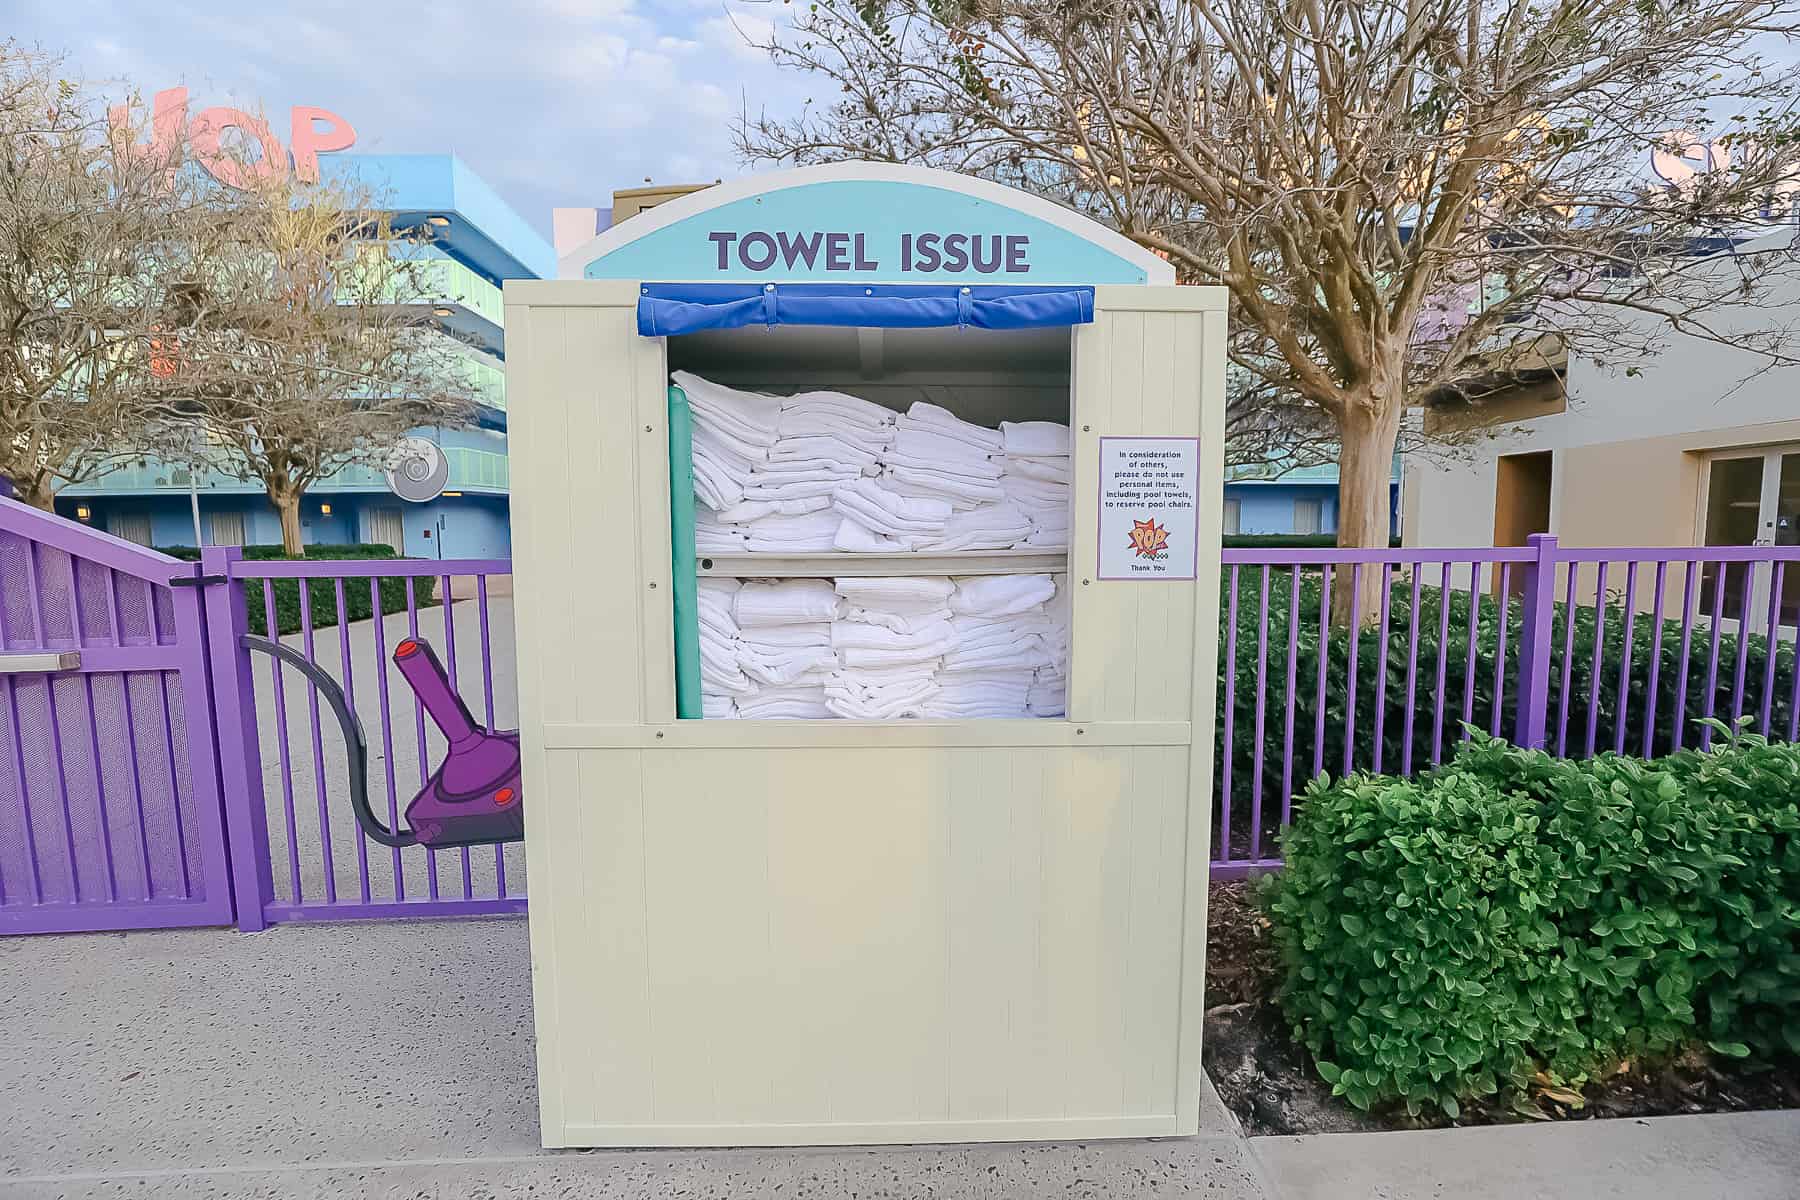 Towel issue bin for guests of the pools at Pop Century Resort 